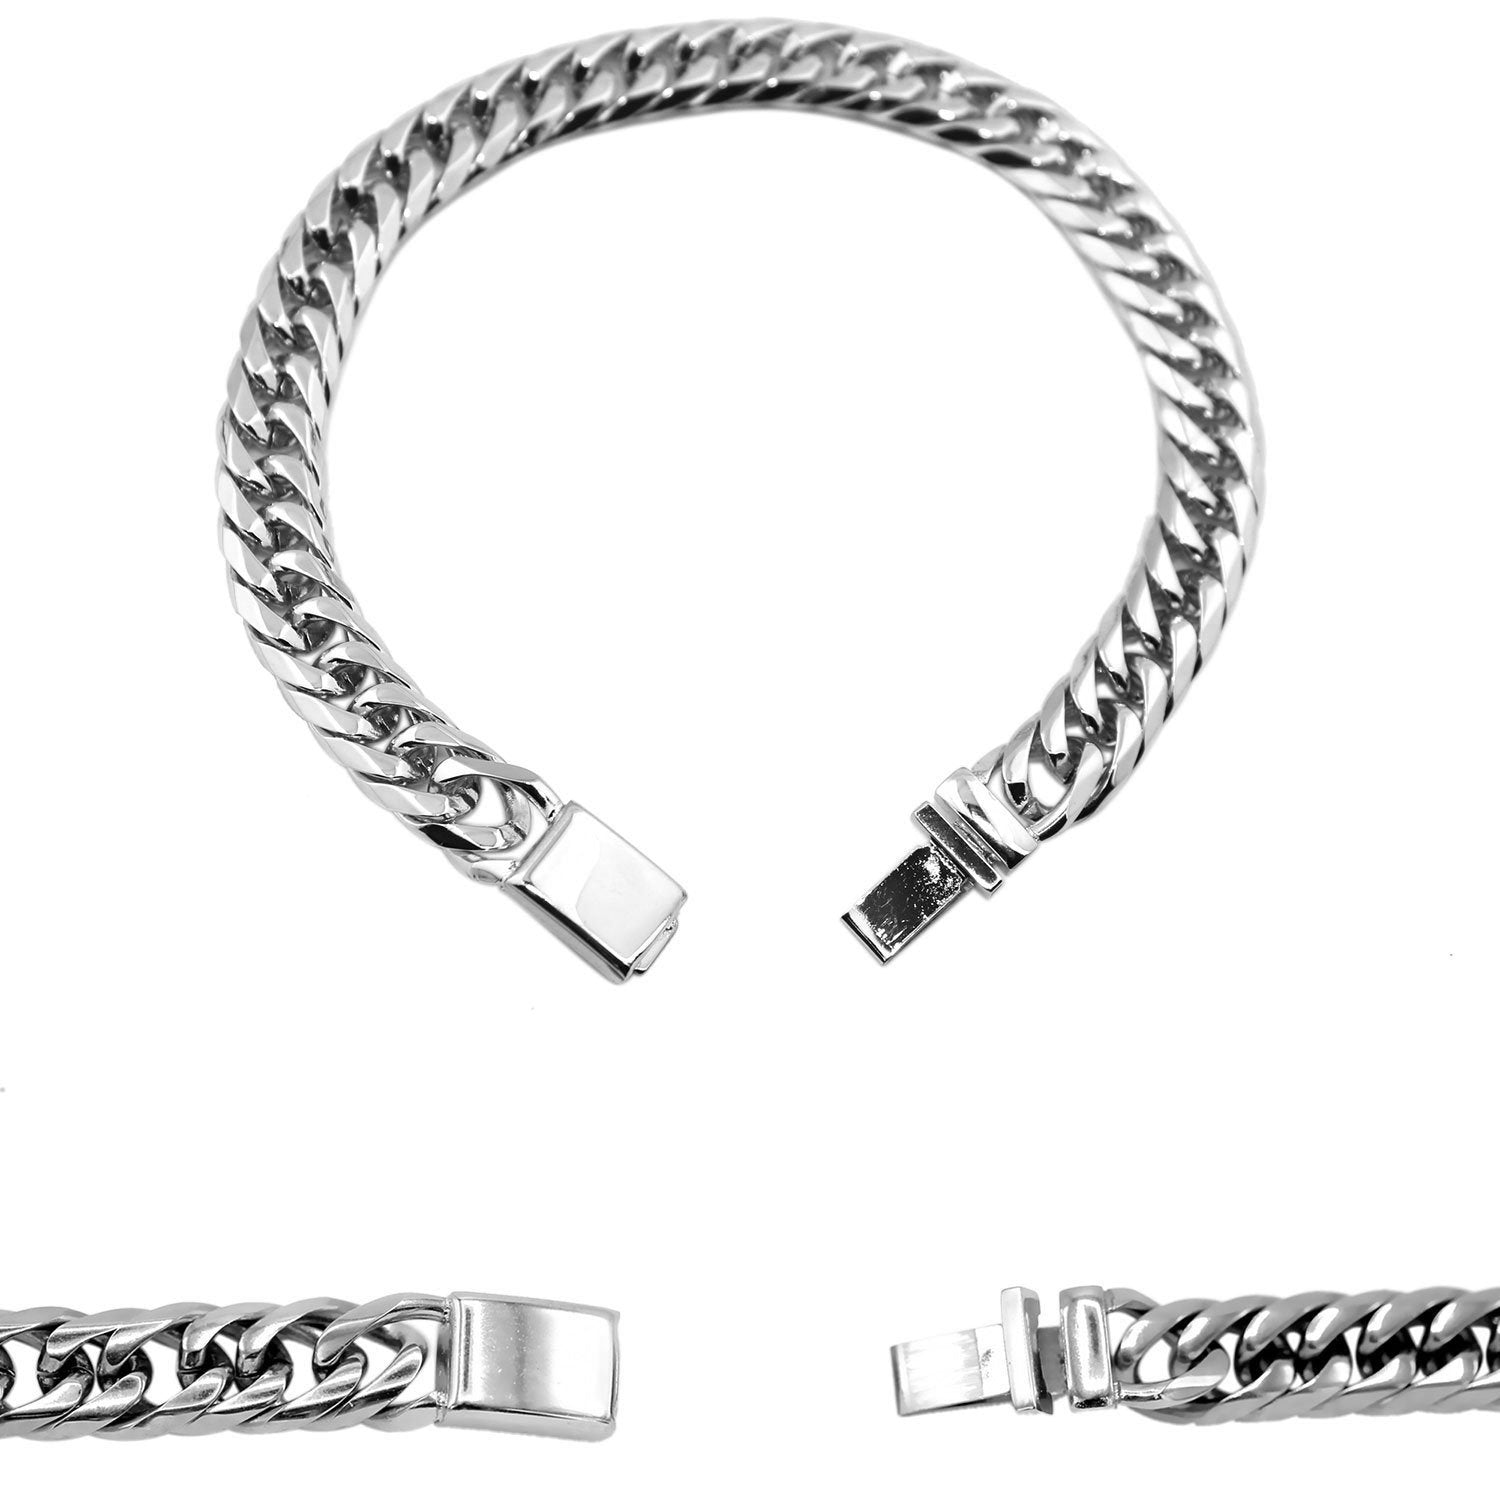 Buy Steelmeup Stainless Steel Simple Curb Cuban Link Chain Bracelet for Men  Boys 8mm 8inch at Amazon.in